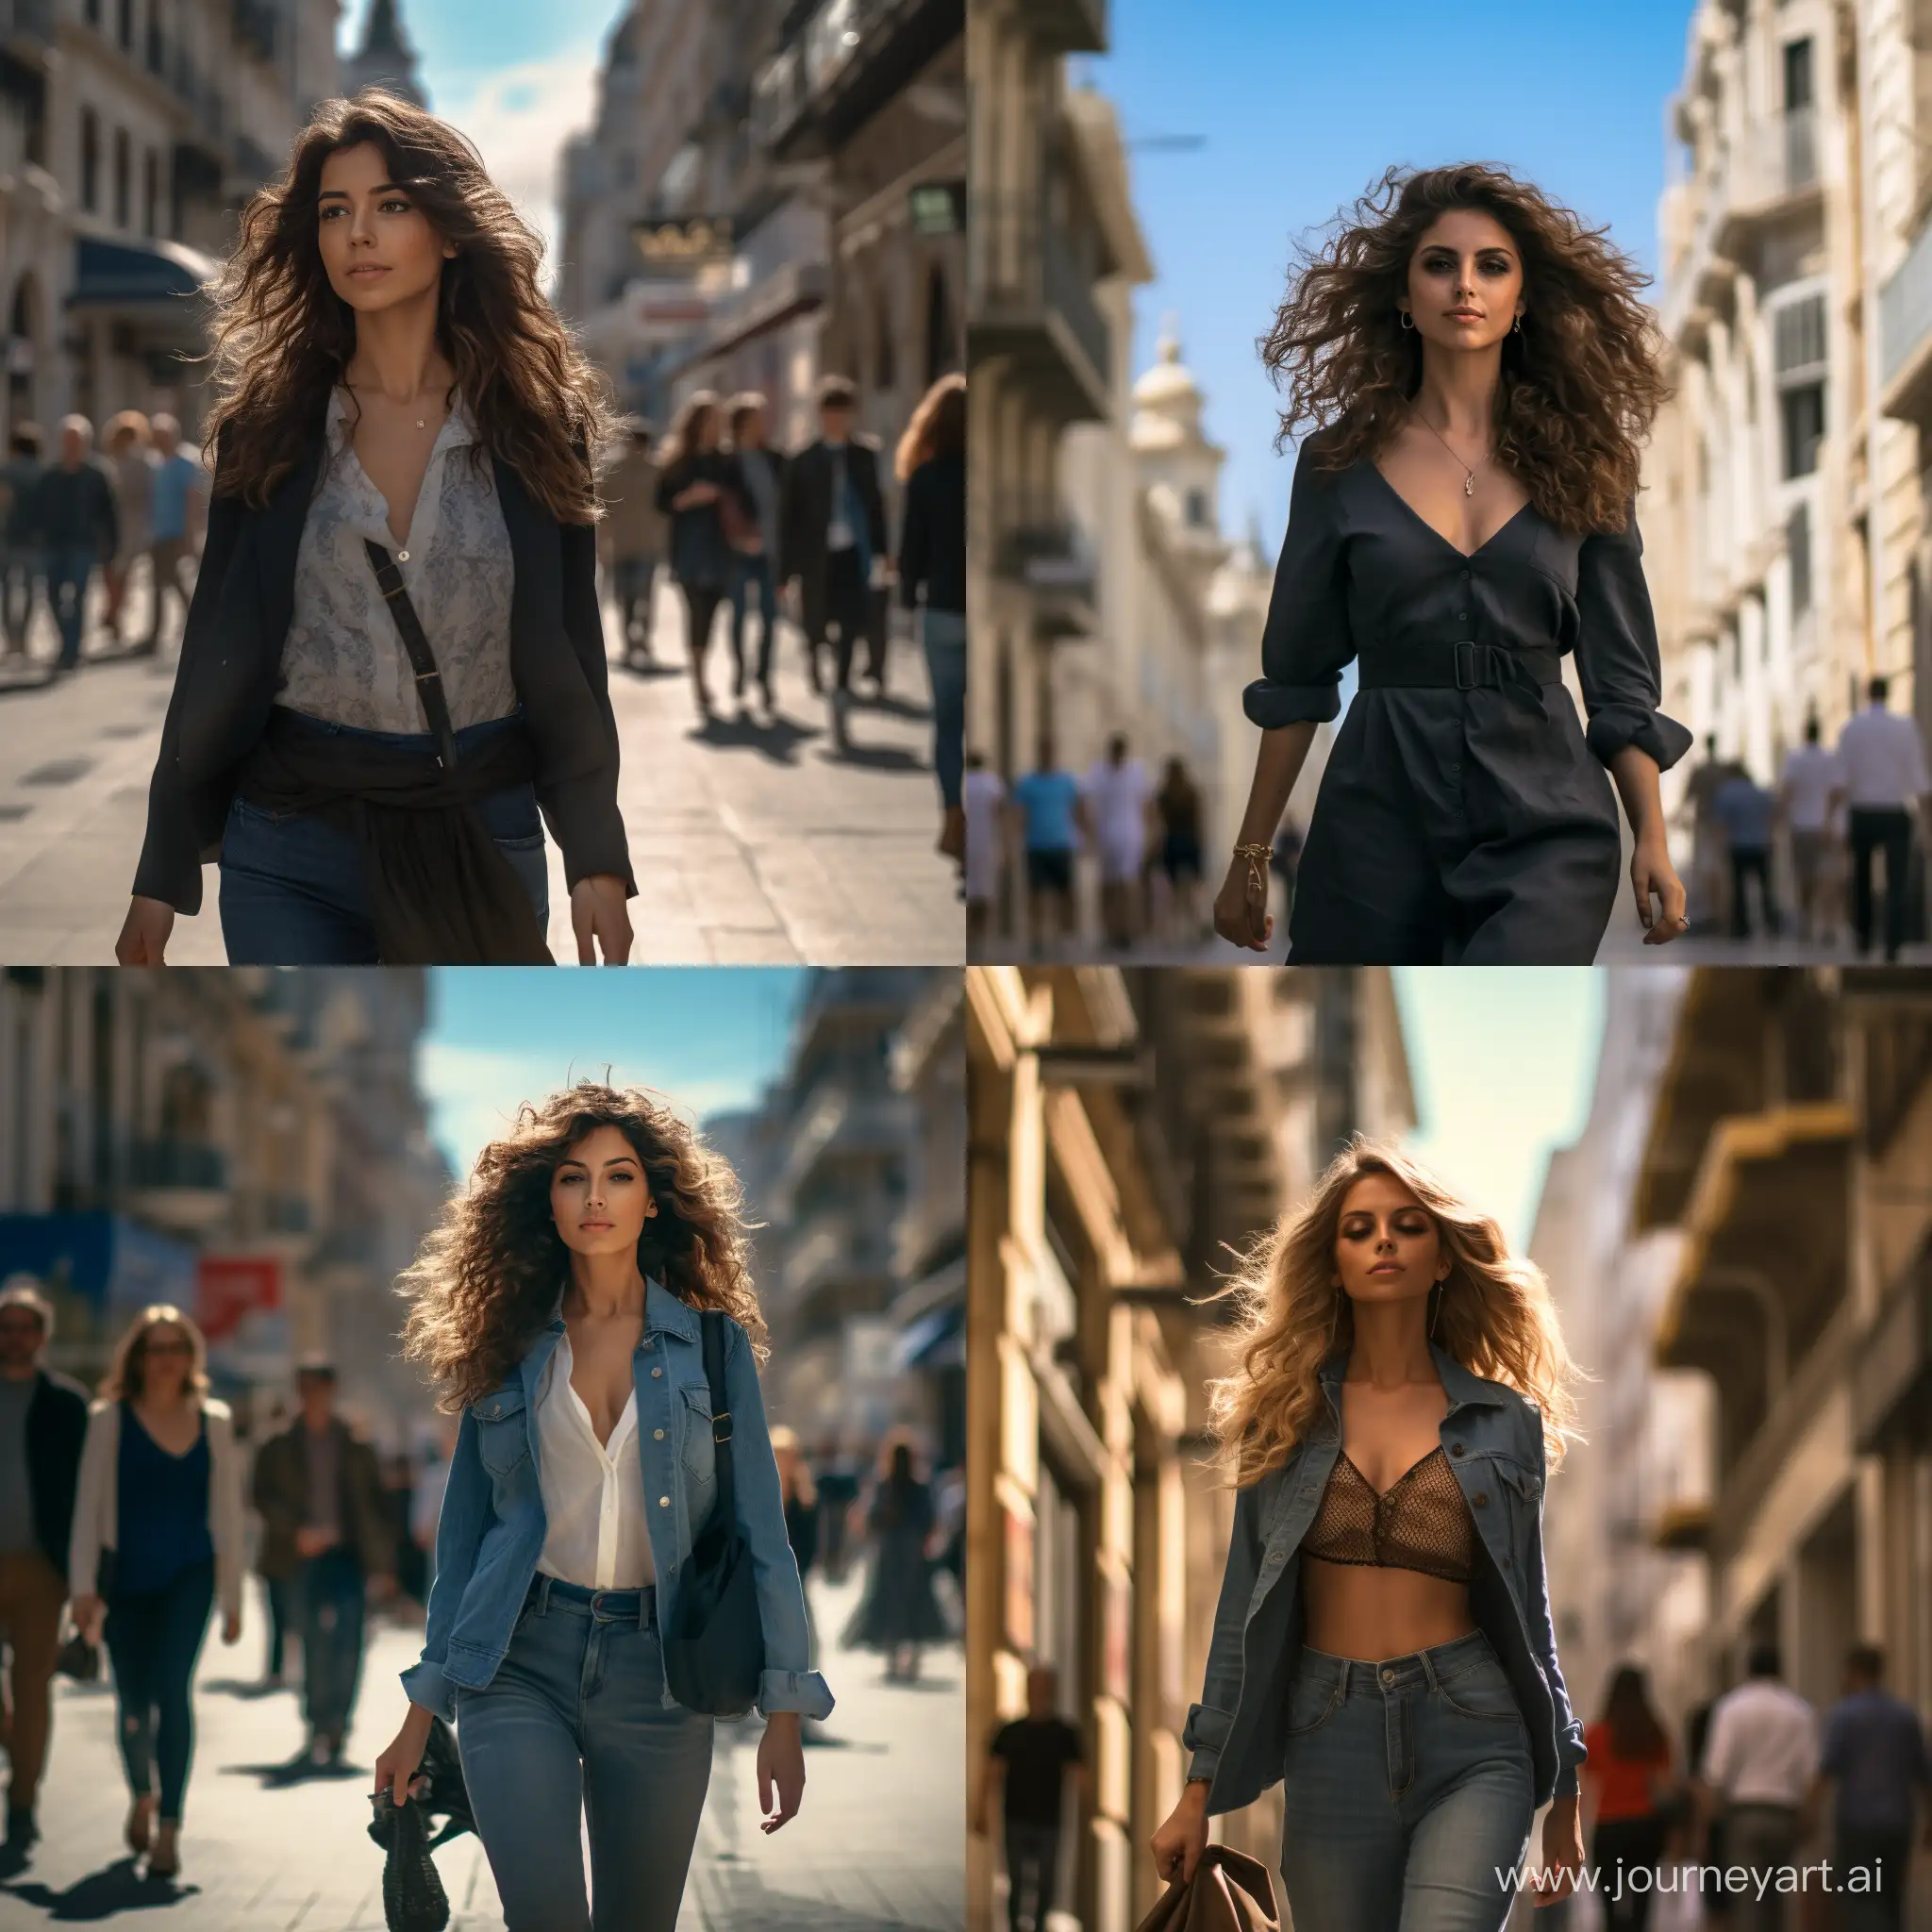 Stylish-Woman-Strolling-the-Streets-of-Spain-HyperRealistic-Photography